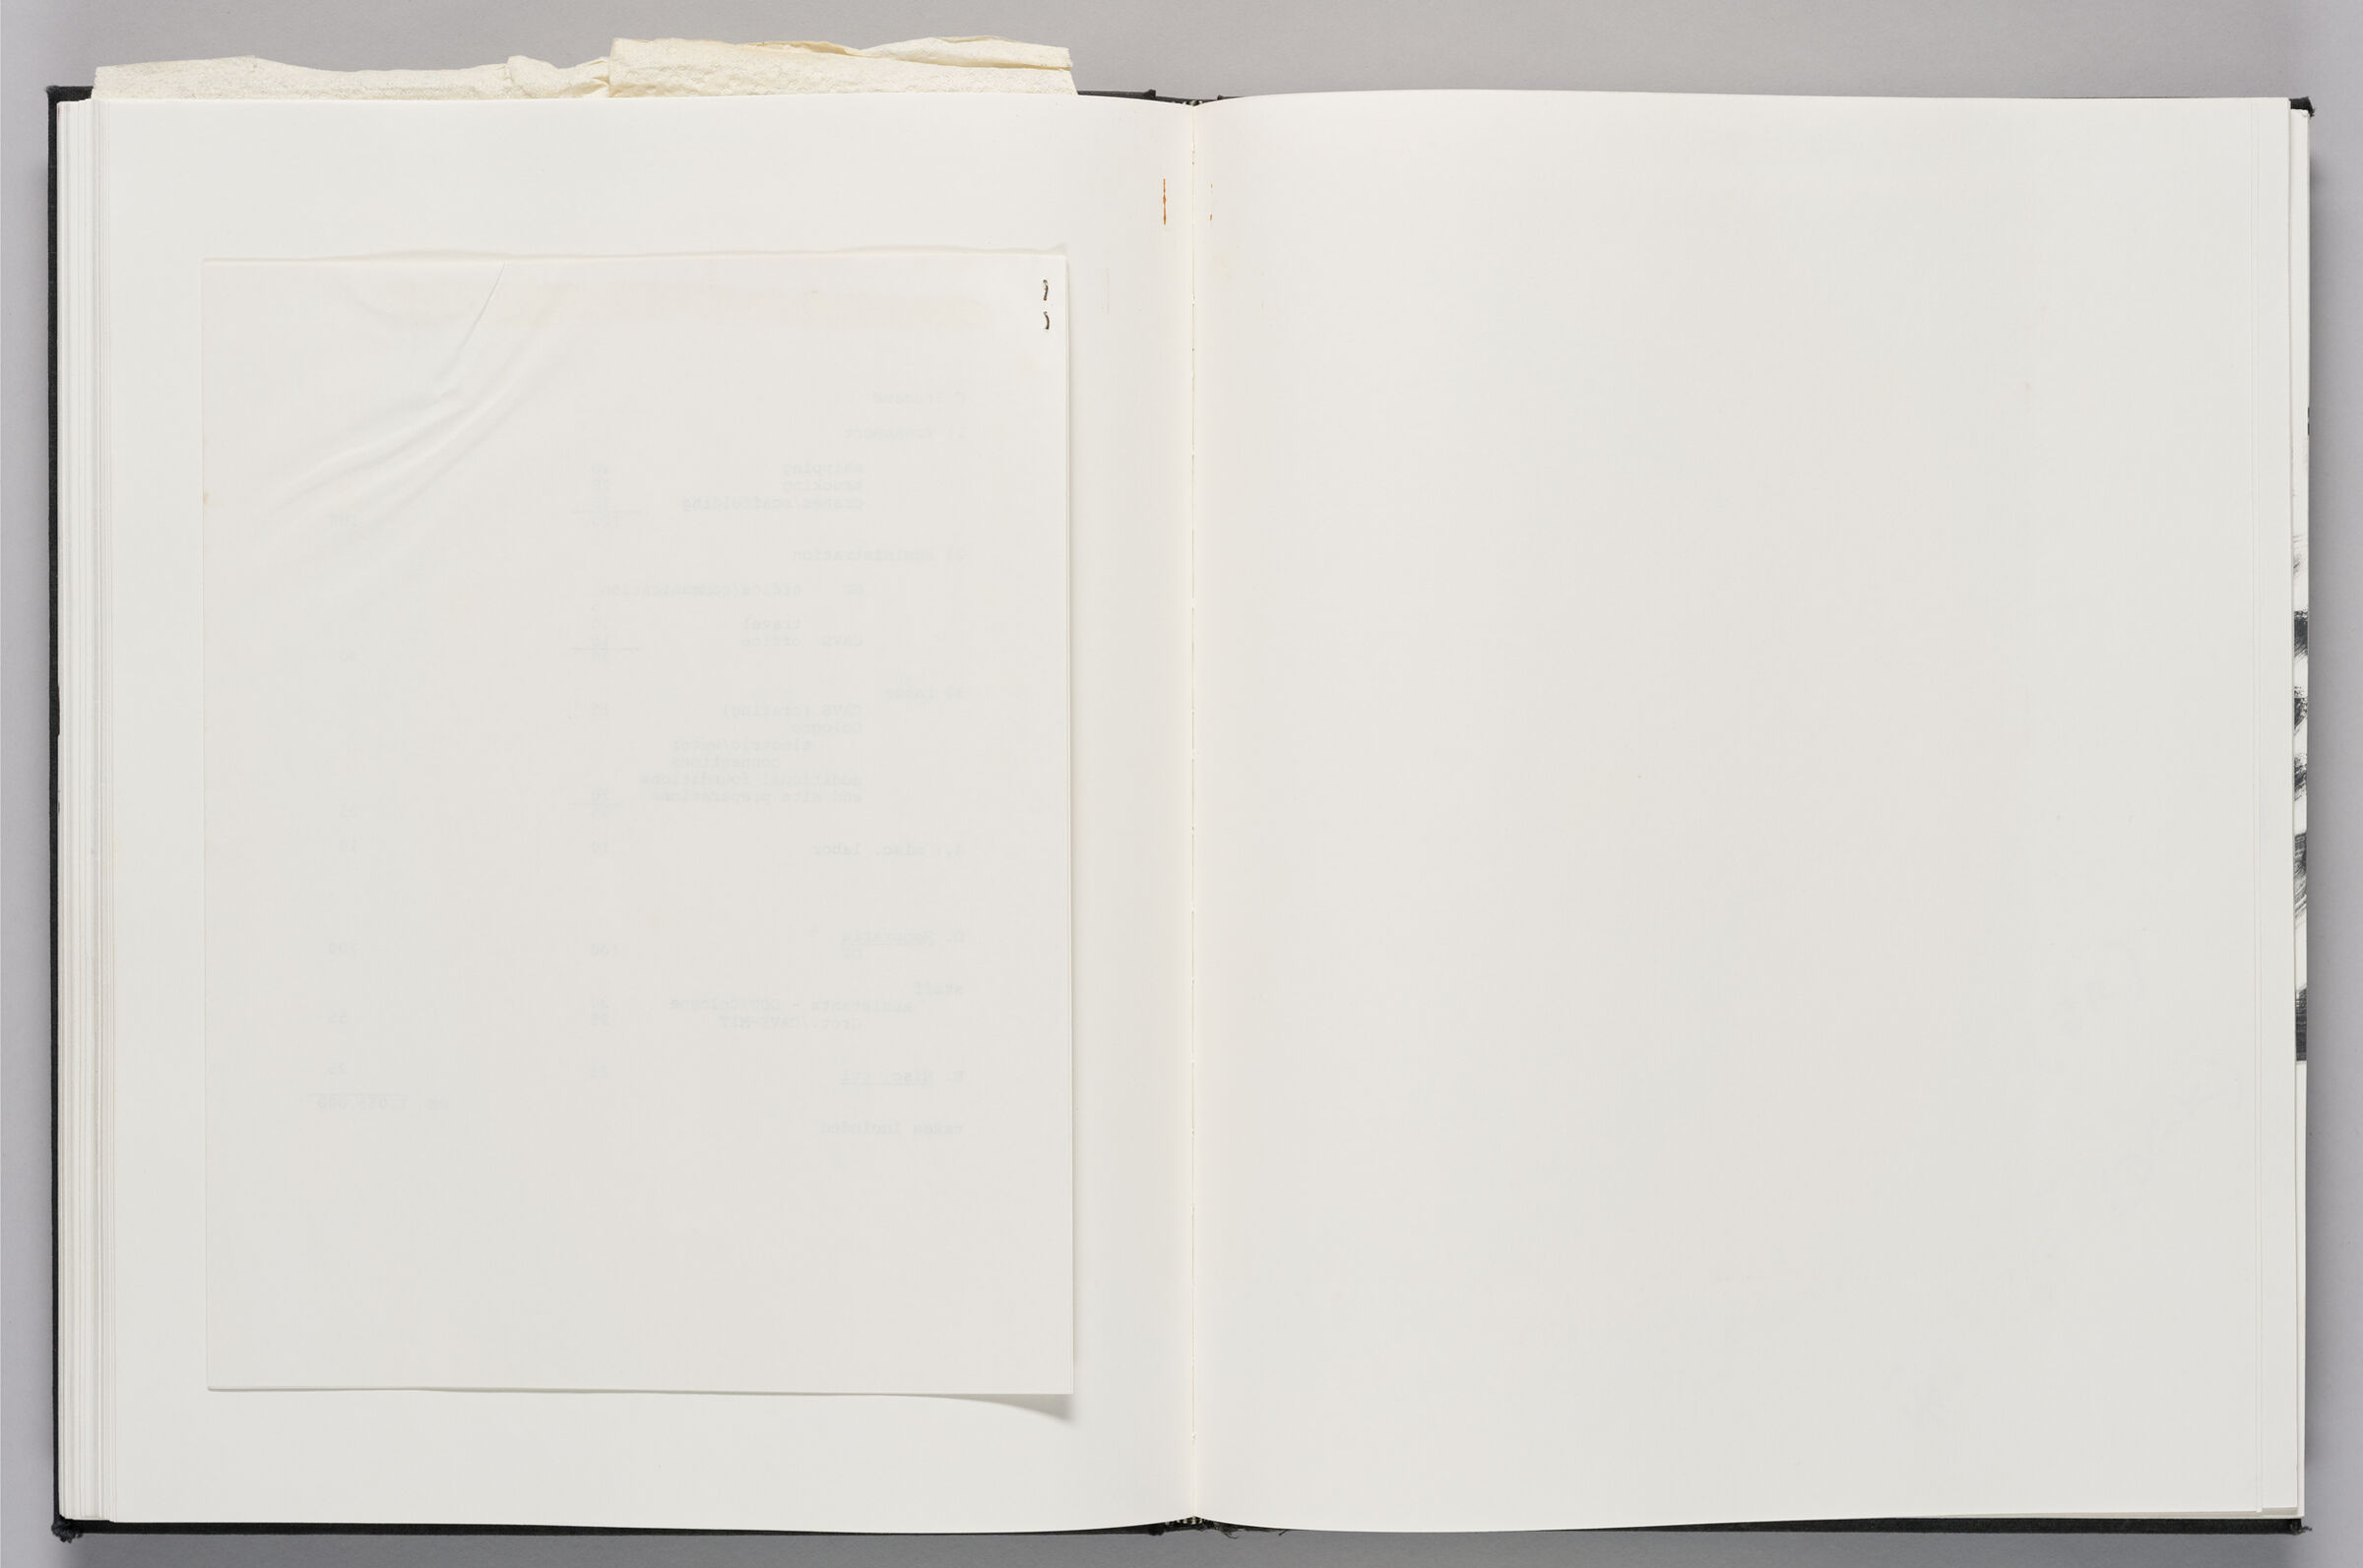 Untitled (Blank, Left Page); Untitled (Blank, Right Page)